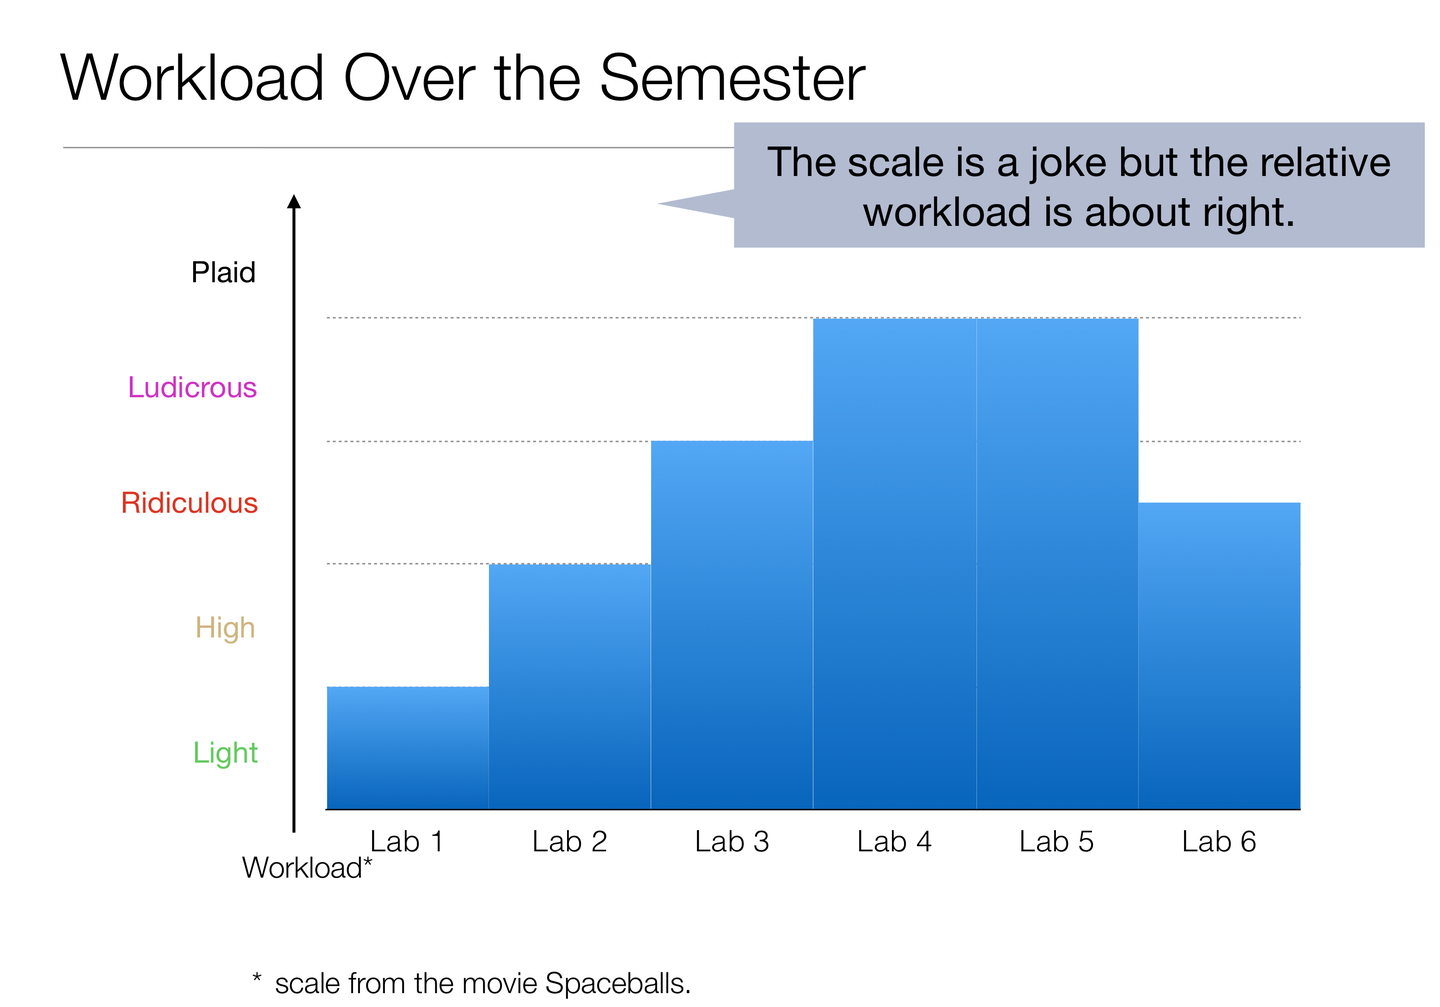 when Jan, the professor of the compiler course, taught us how ridiculous the compiler course workload would be like...